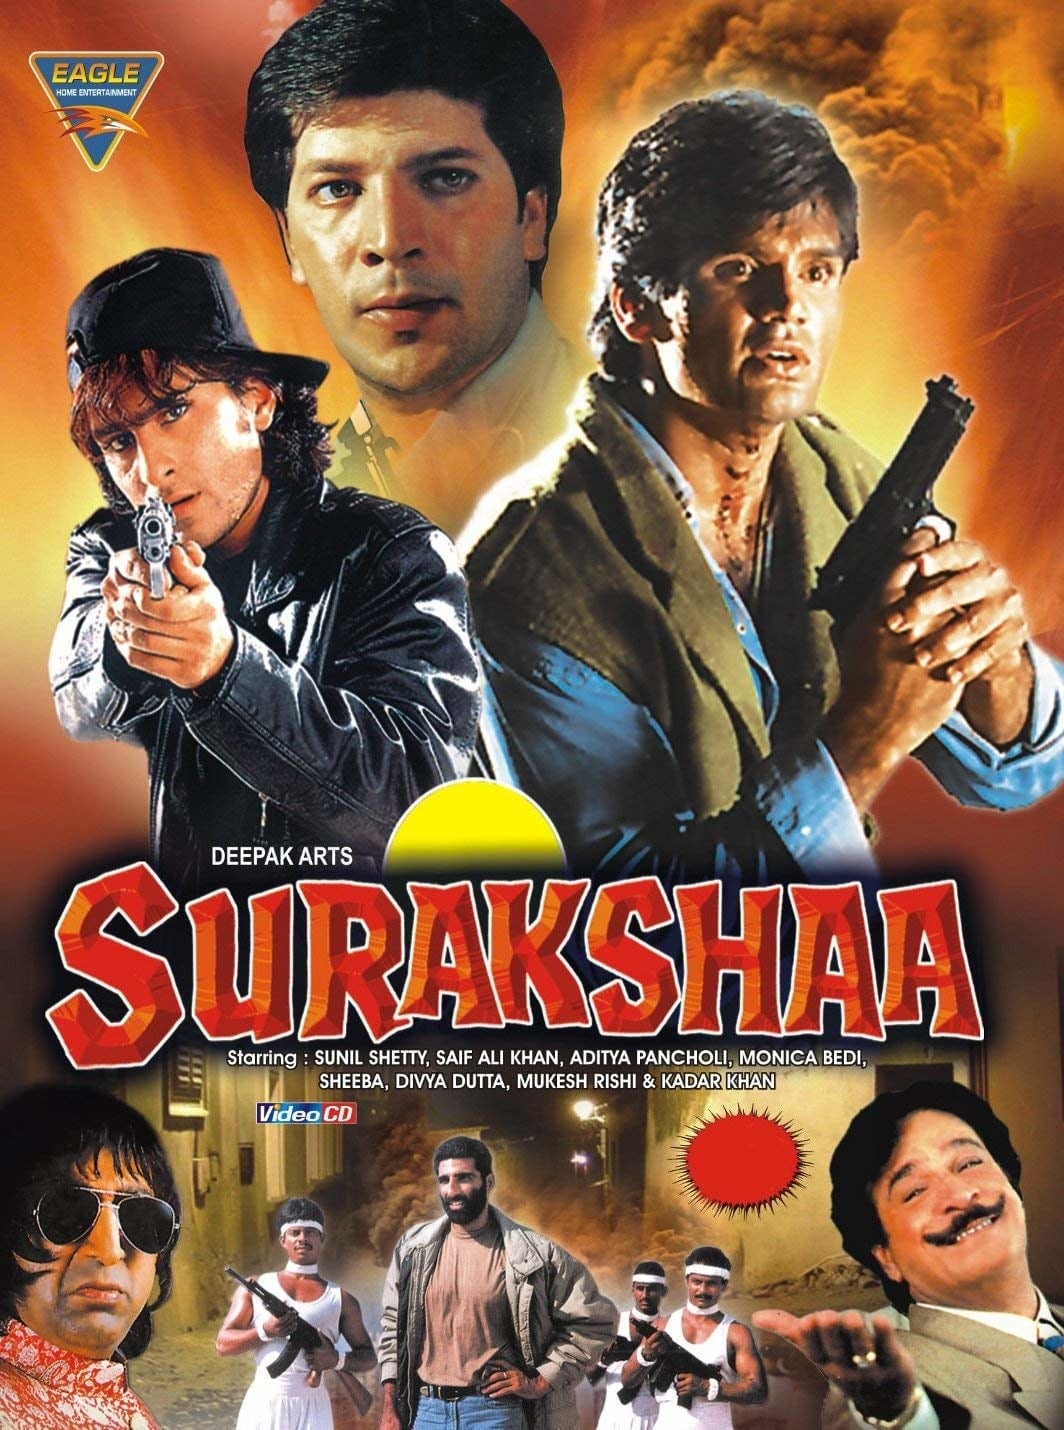 Poster for the movie "Surakshaa"